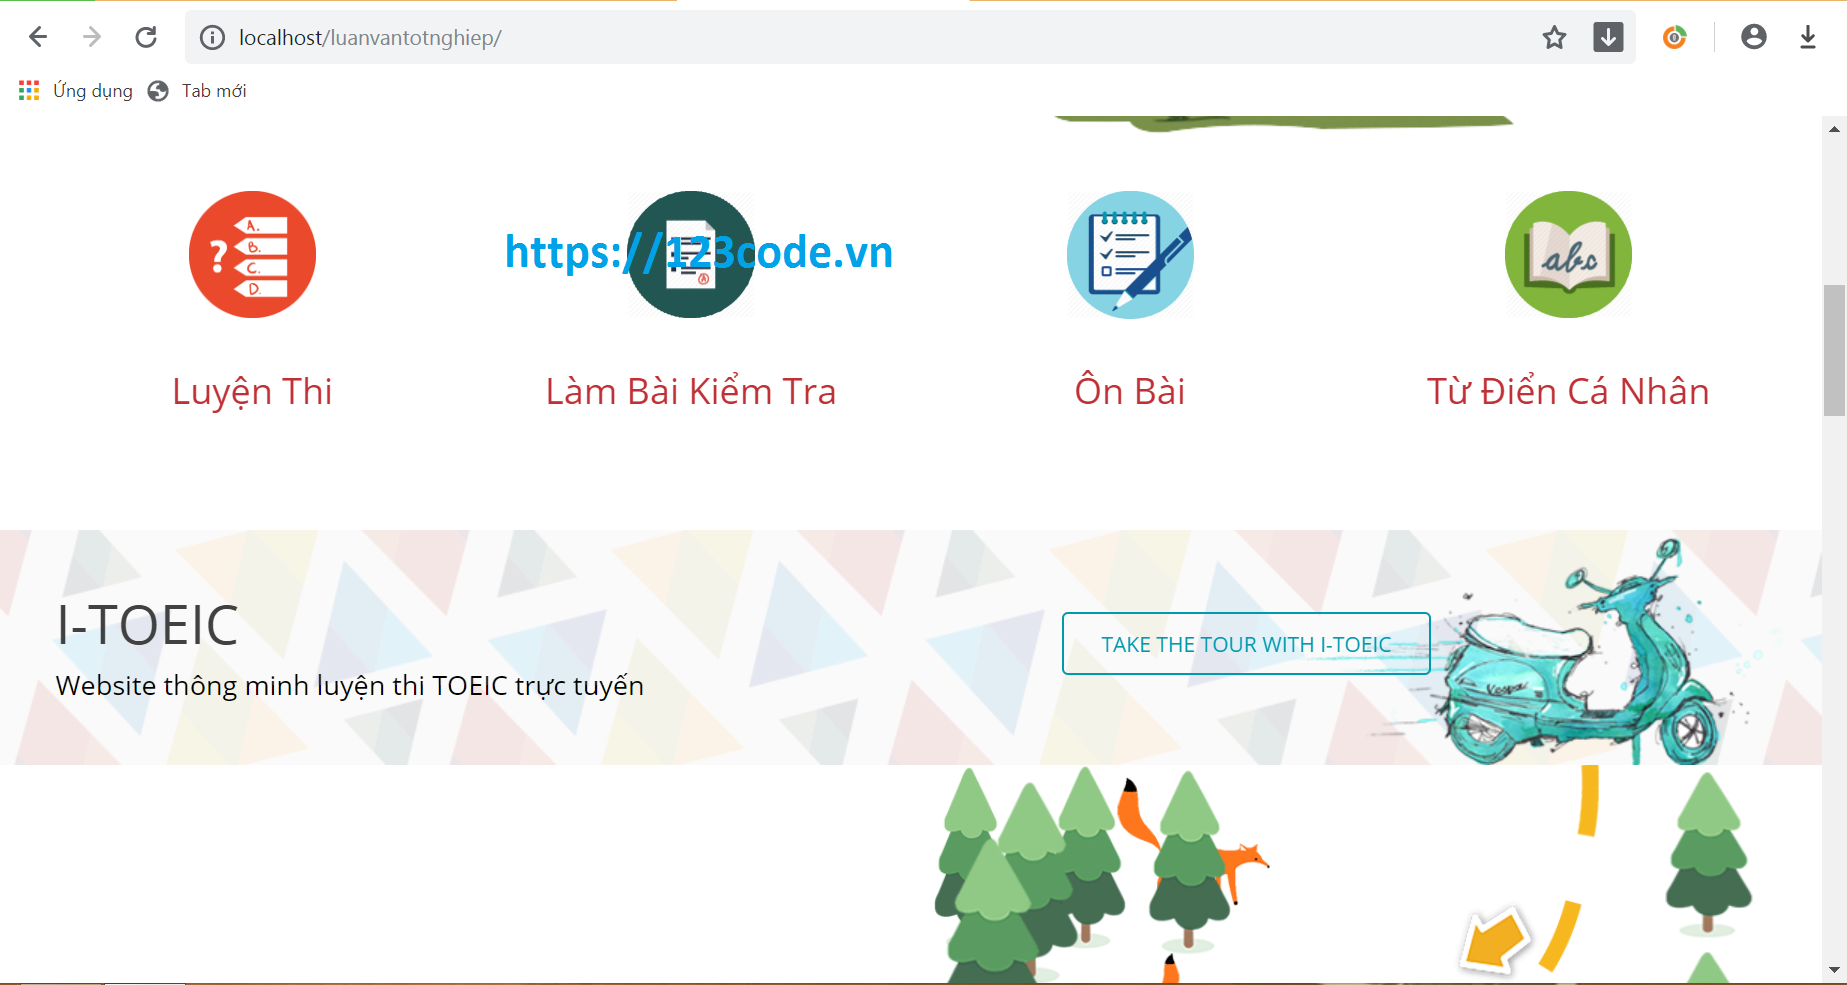 Share source code luyện thi trắc nghiệm tiếng anh php CodeIgniter Framework